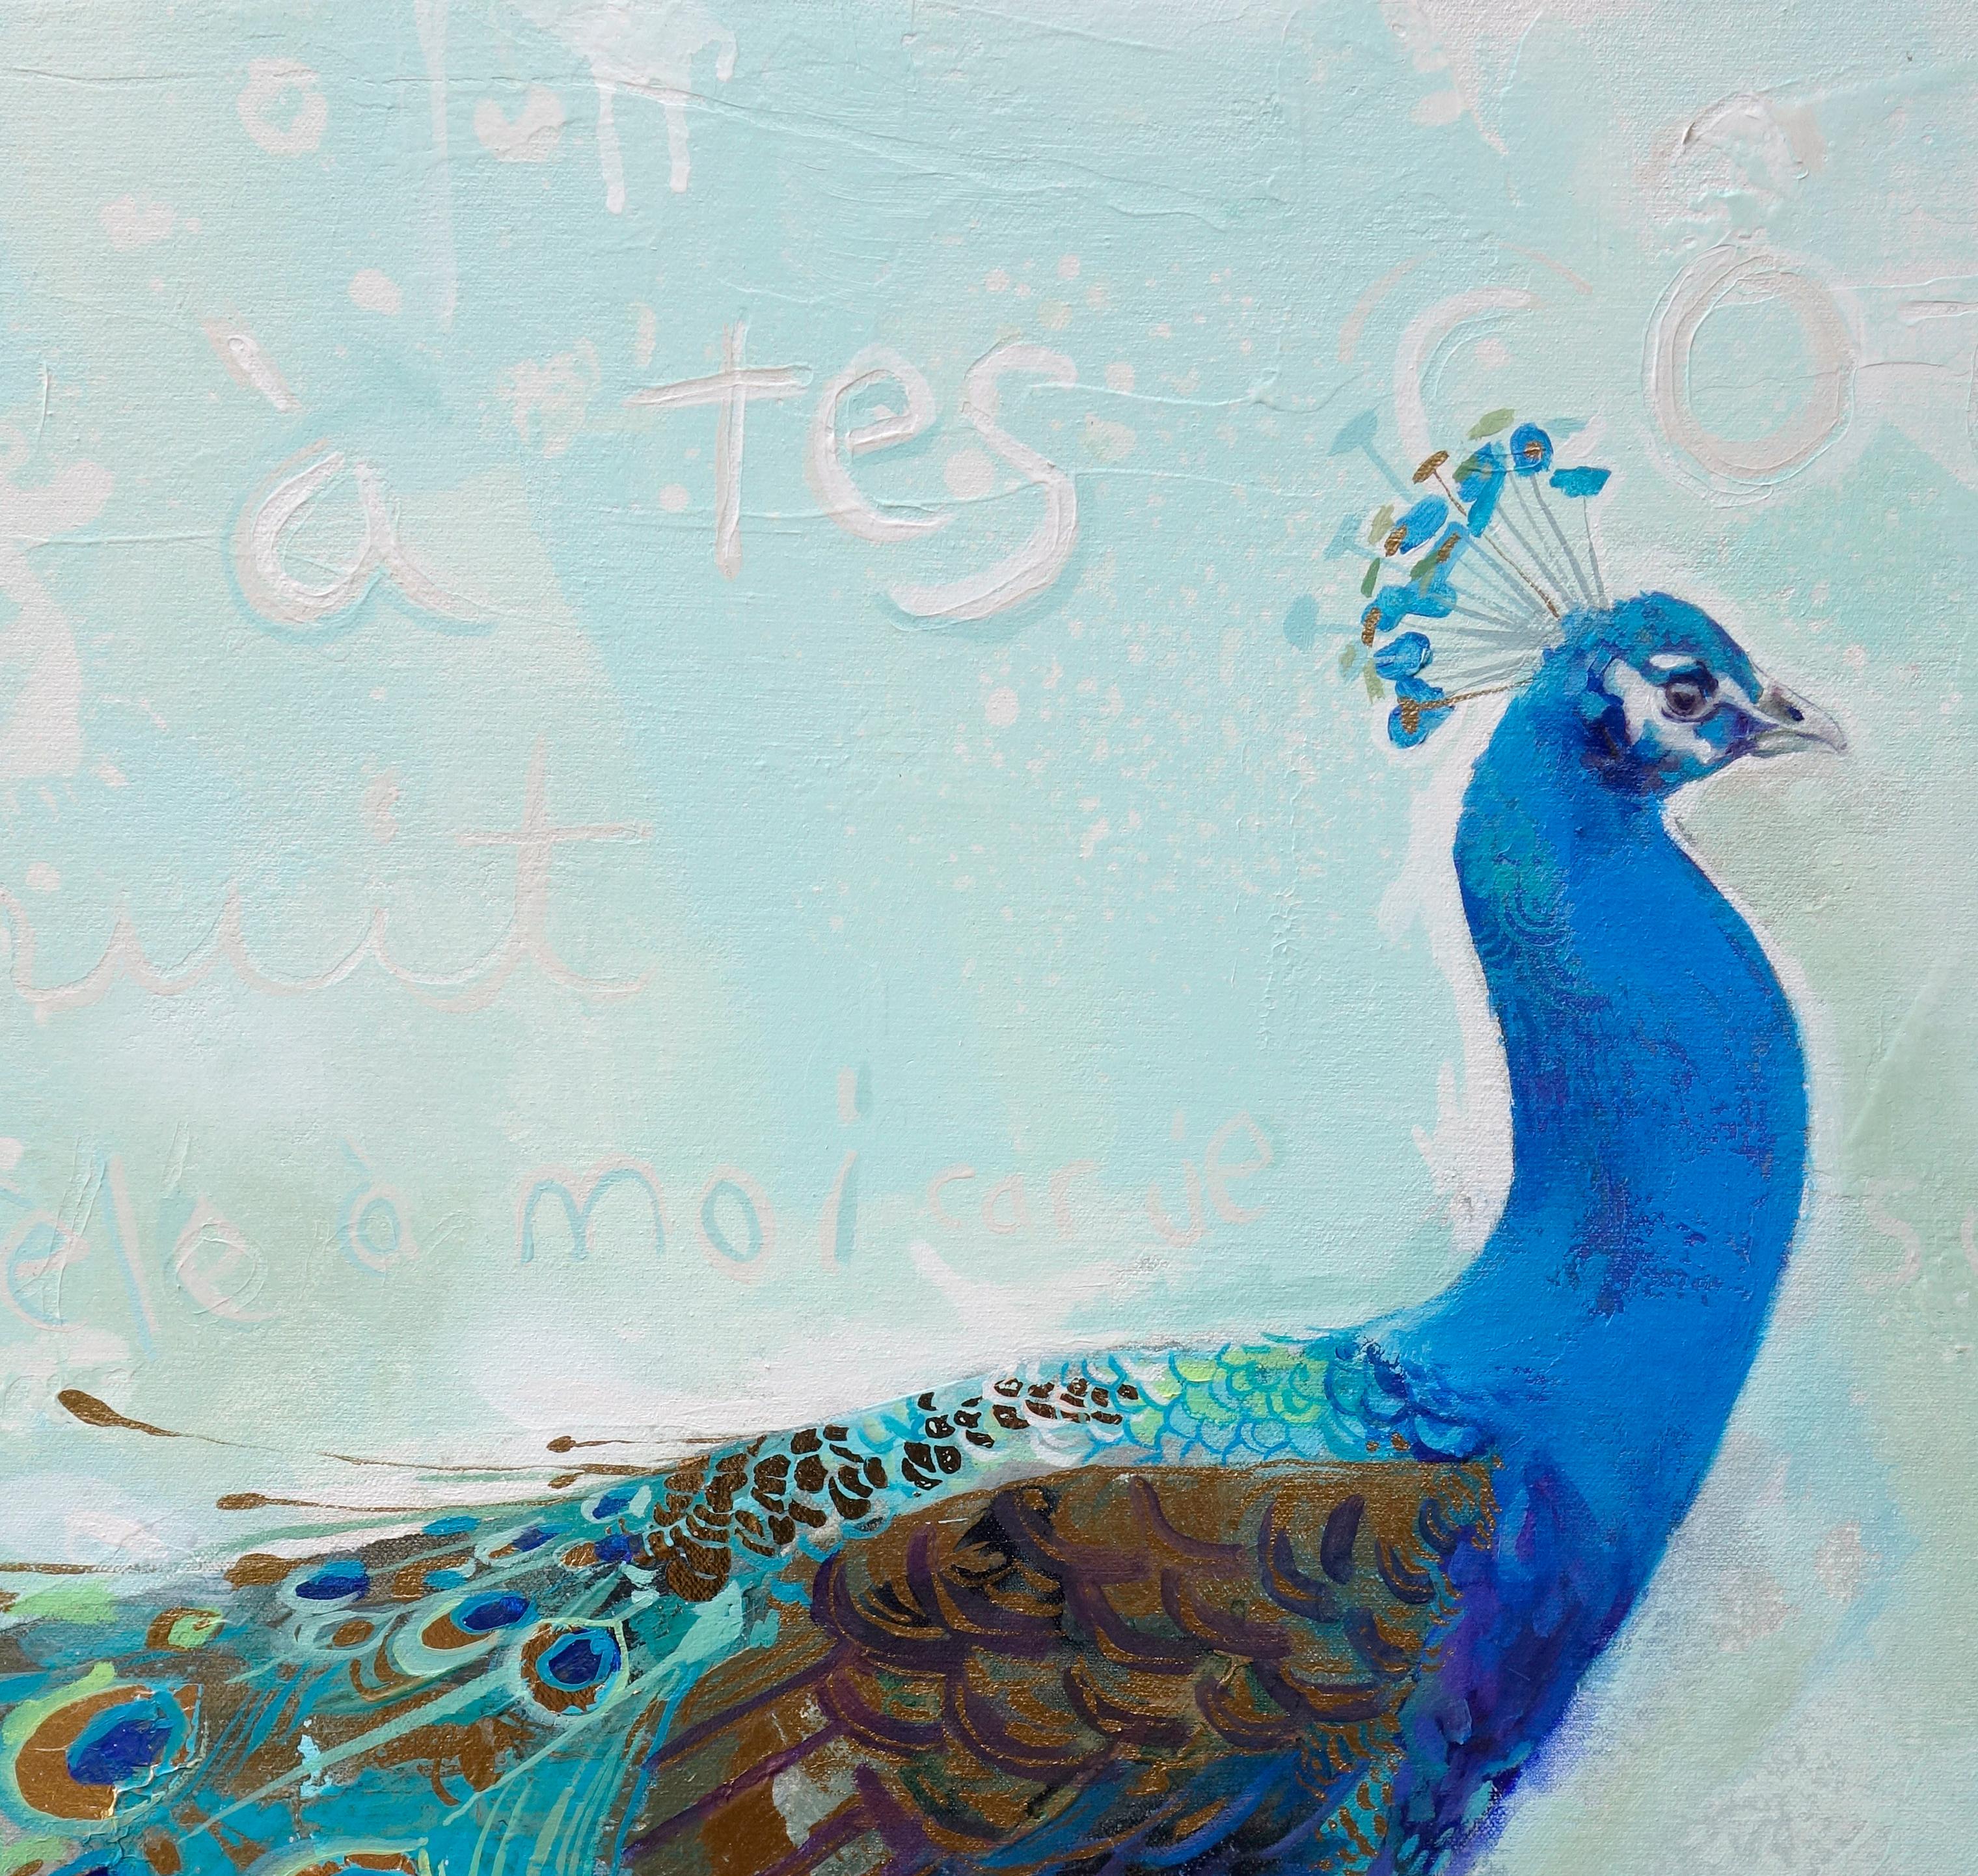  Beauté Victorienne abstract turquoise Peacock with bold colors, layered texture - Painting by Eric Robitaille